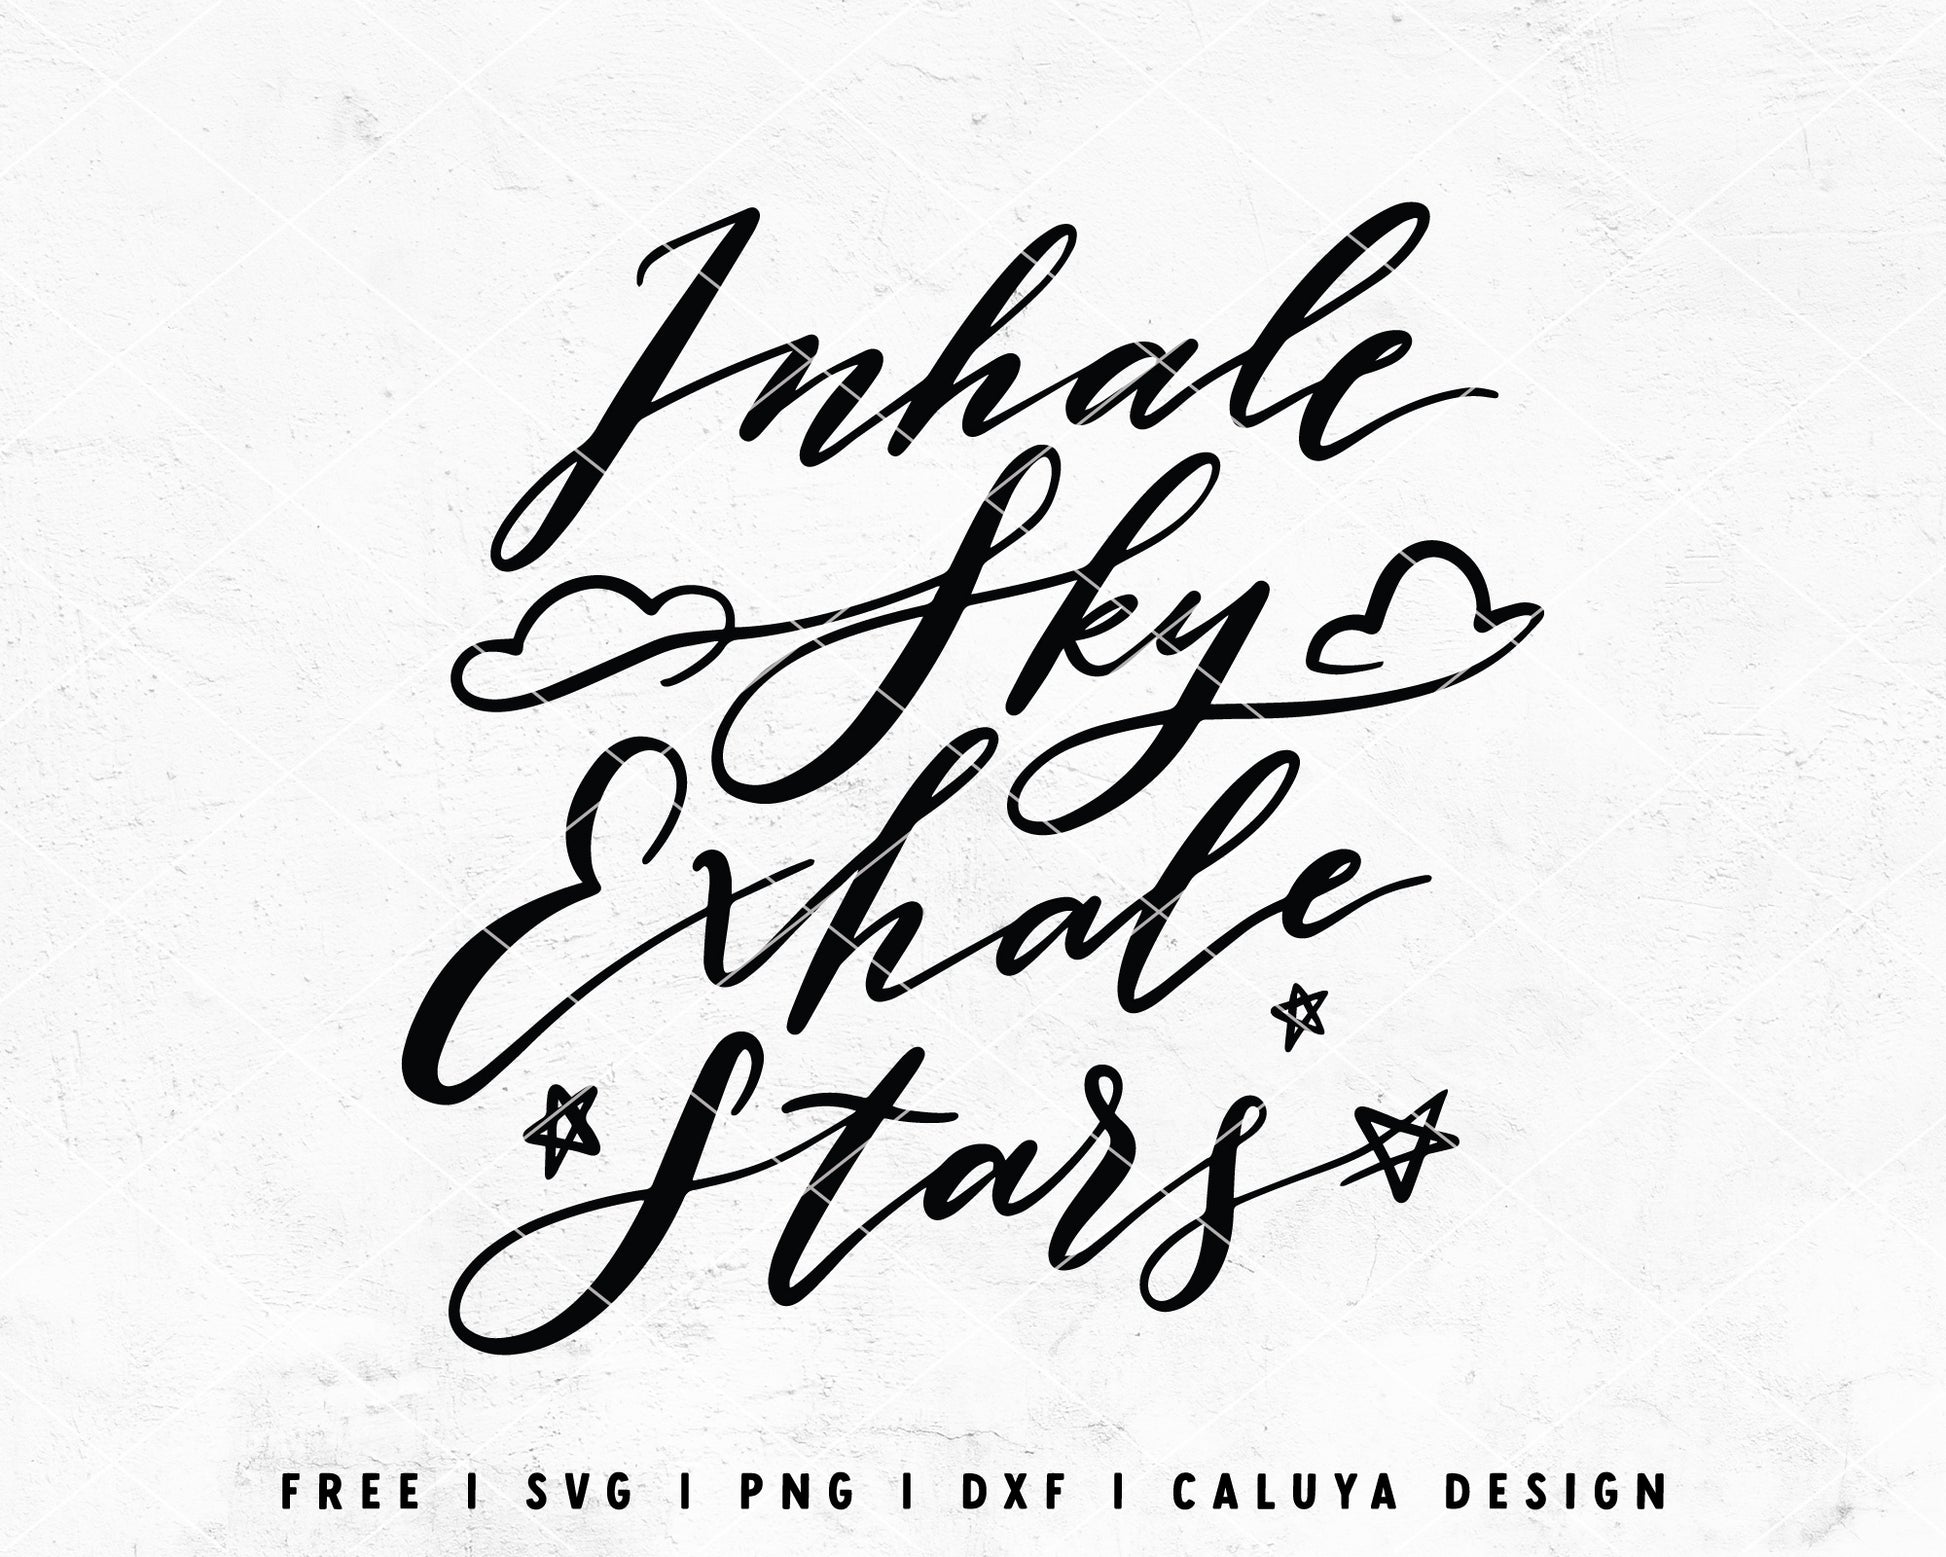 FREE Inspirational SVG | Quote SVG | Inhale Exhale SVG Cut File for Cricut, Cameo Silhouette | Free SVG Cut File